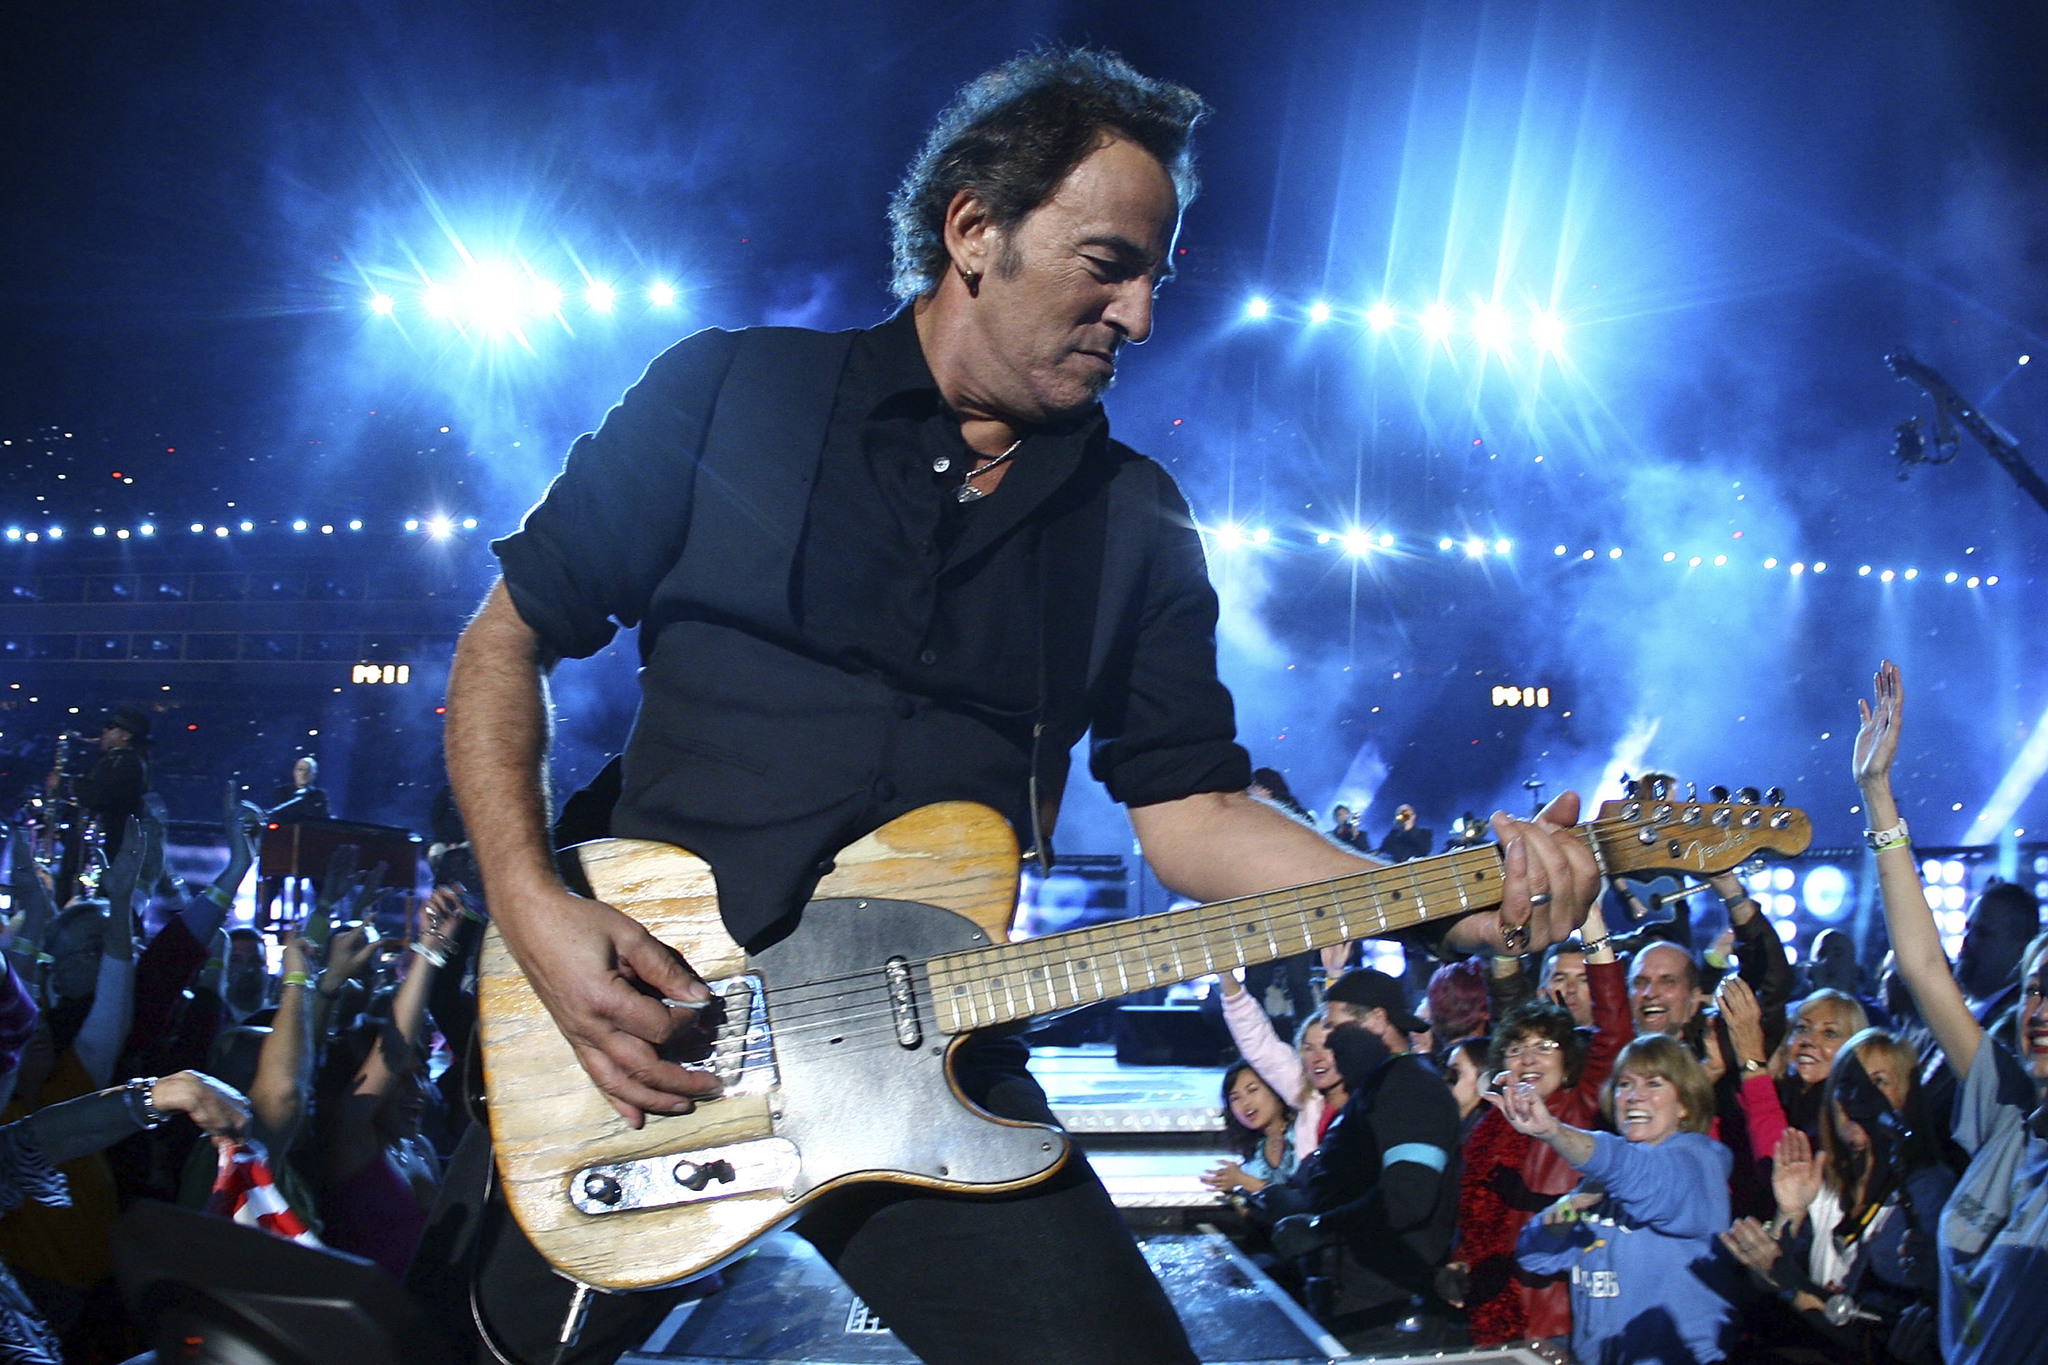 AOTM: Bruce Springsteen’s Autobiography ‘Born to Run’ is Nominated for a Grammy